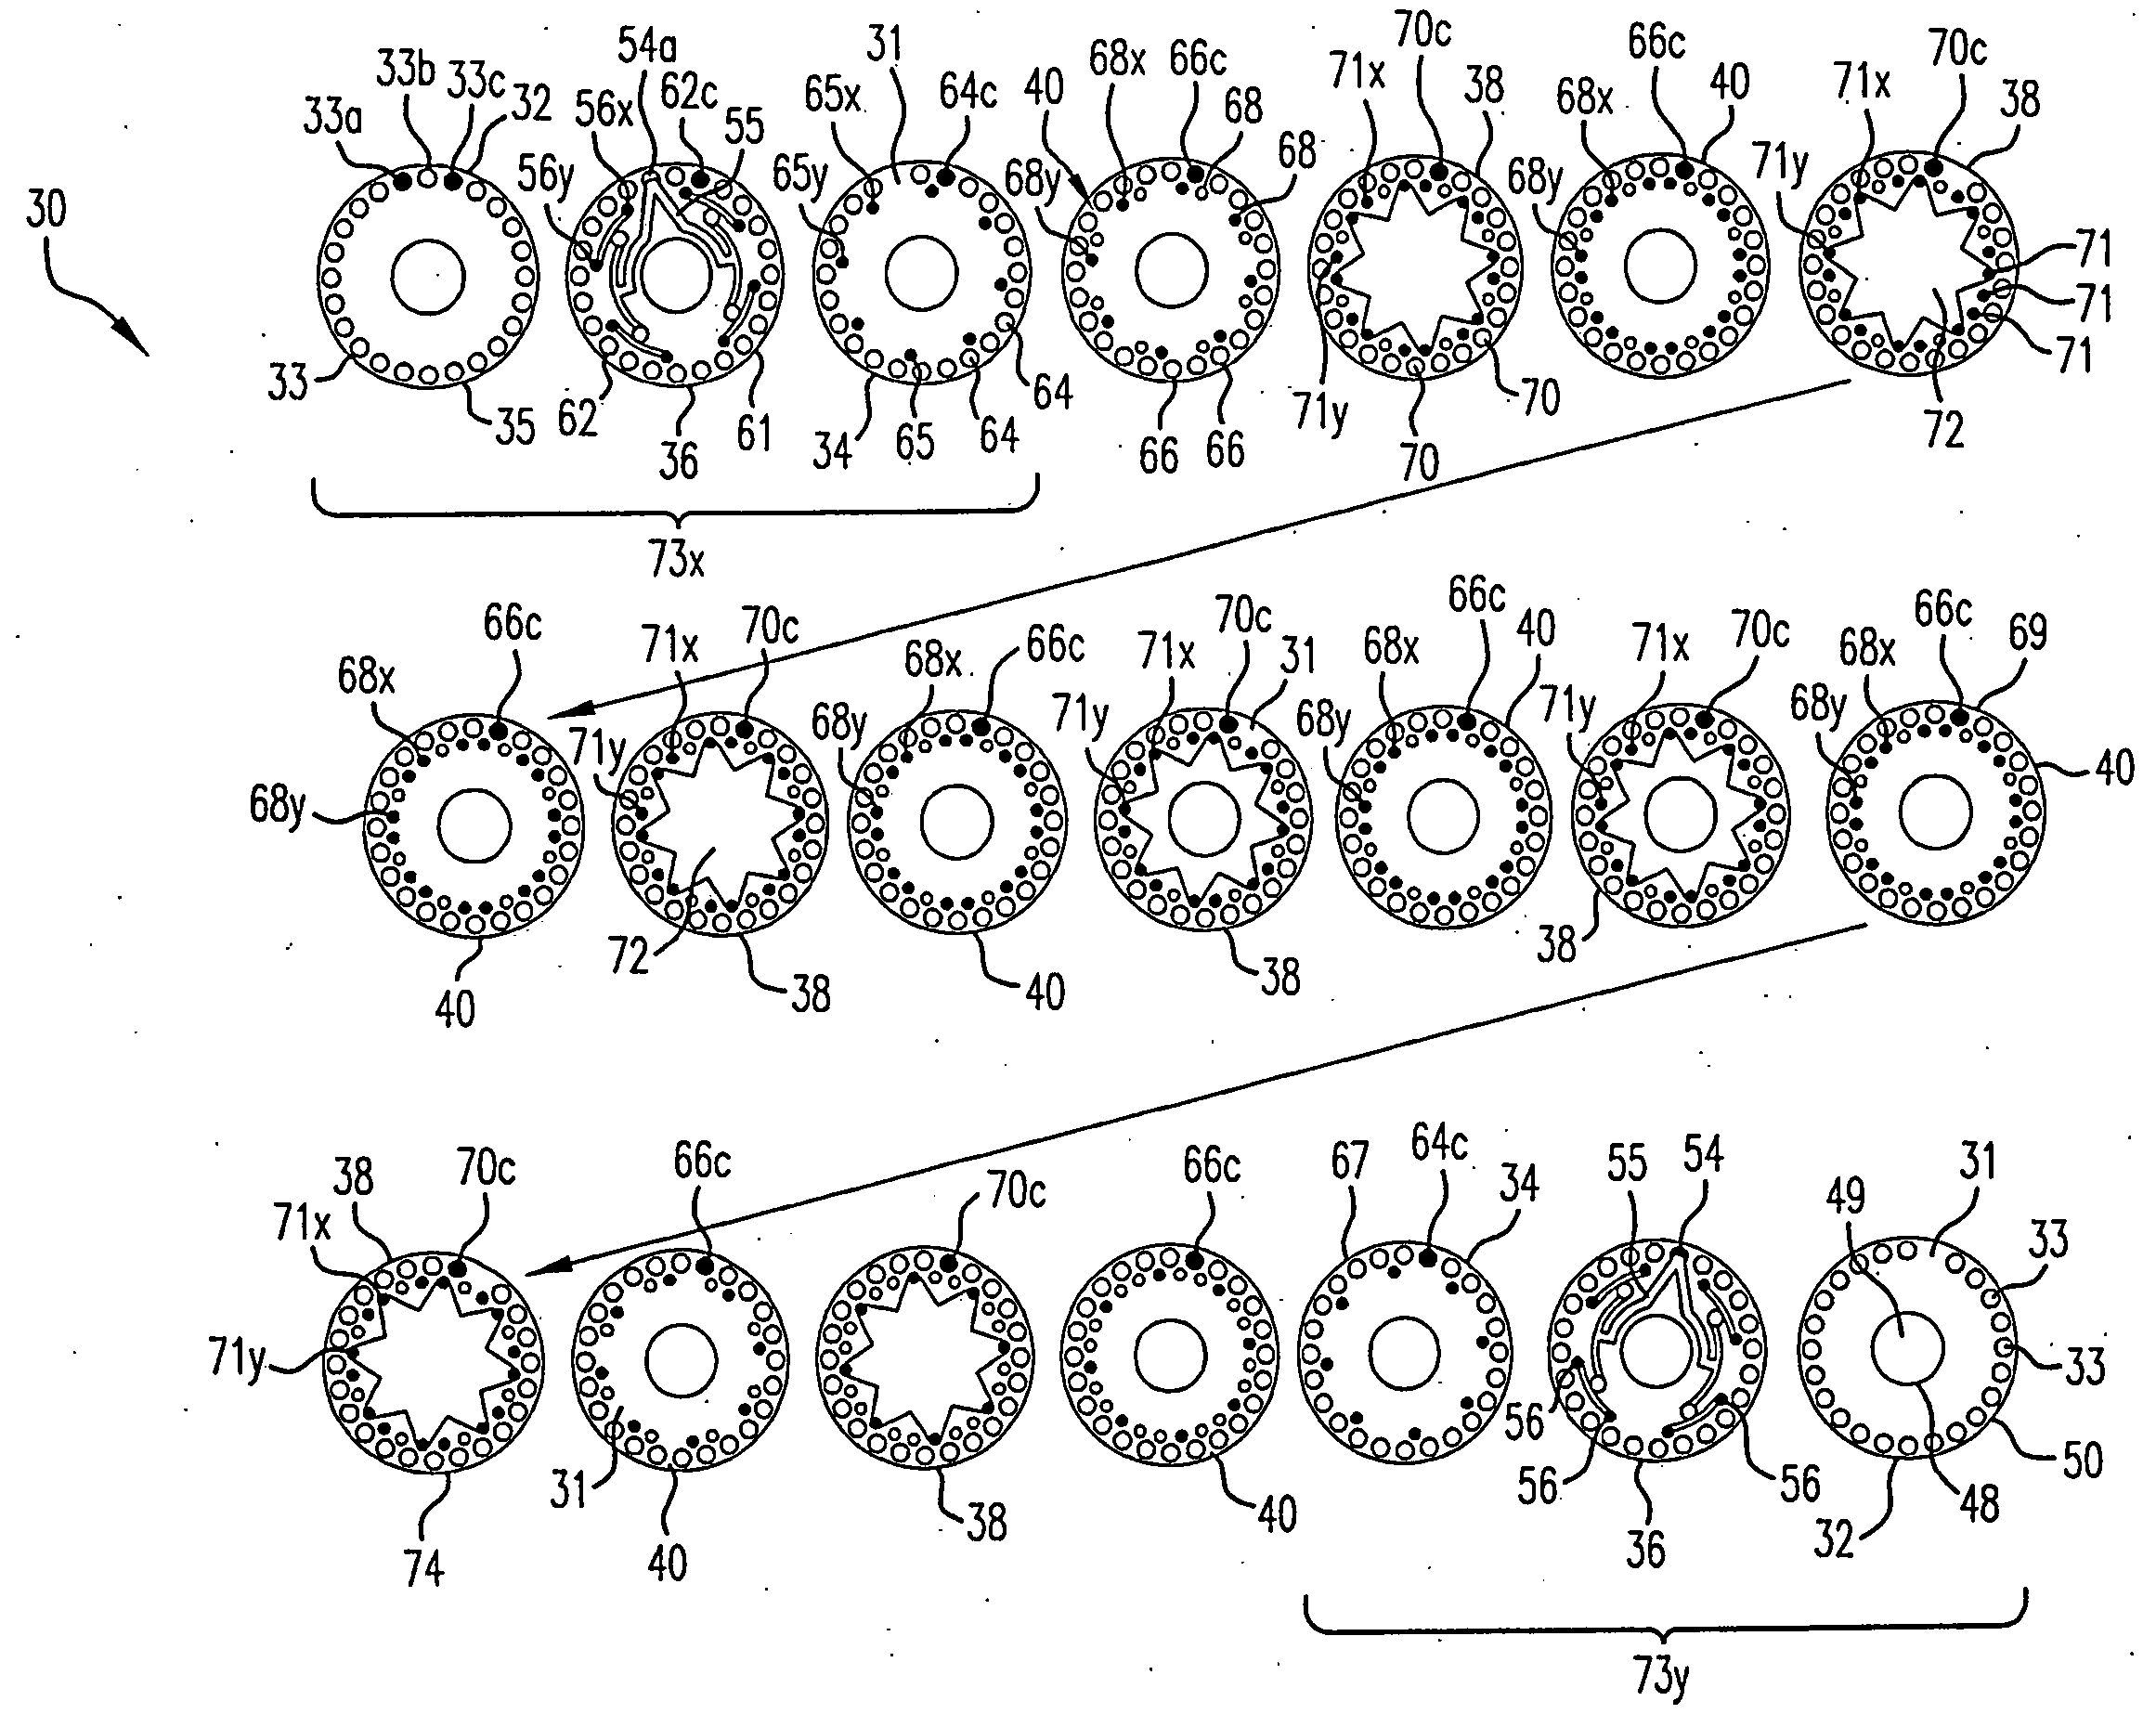 Layer sequence repeater module for a modular disk co-extrusion die and products thereof